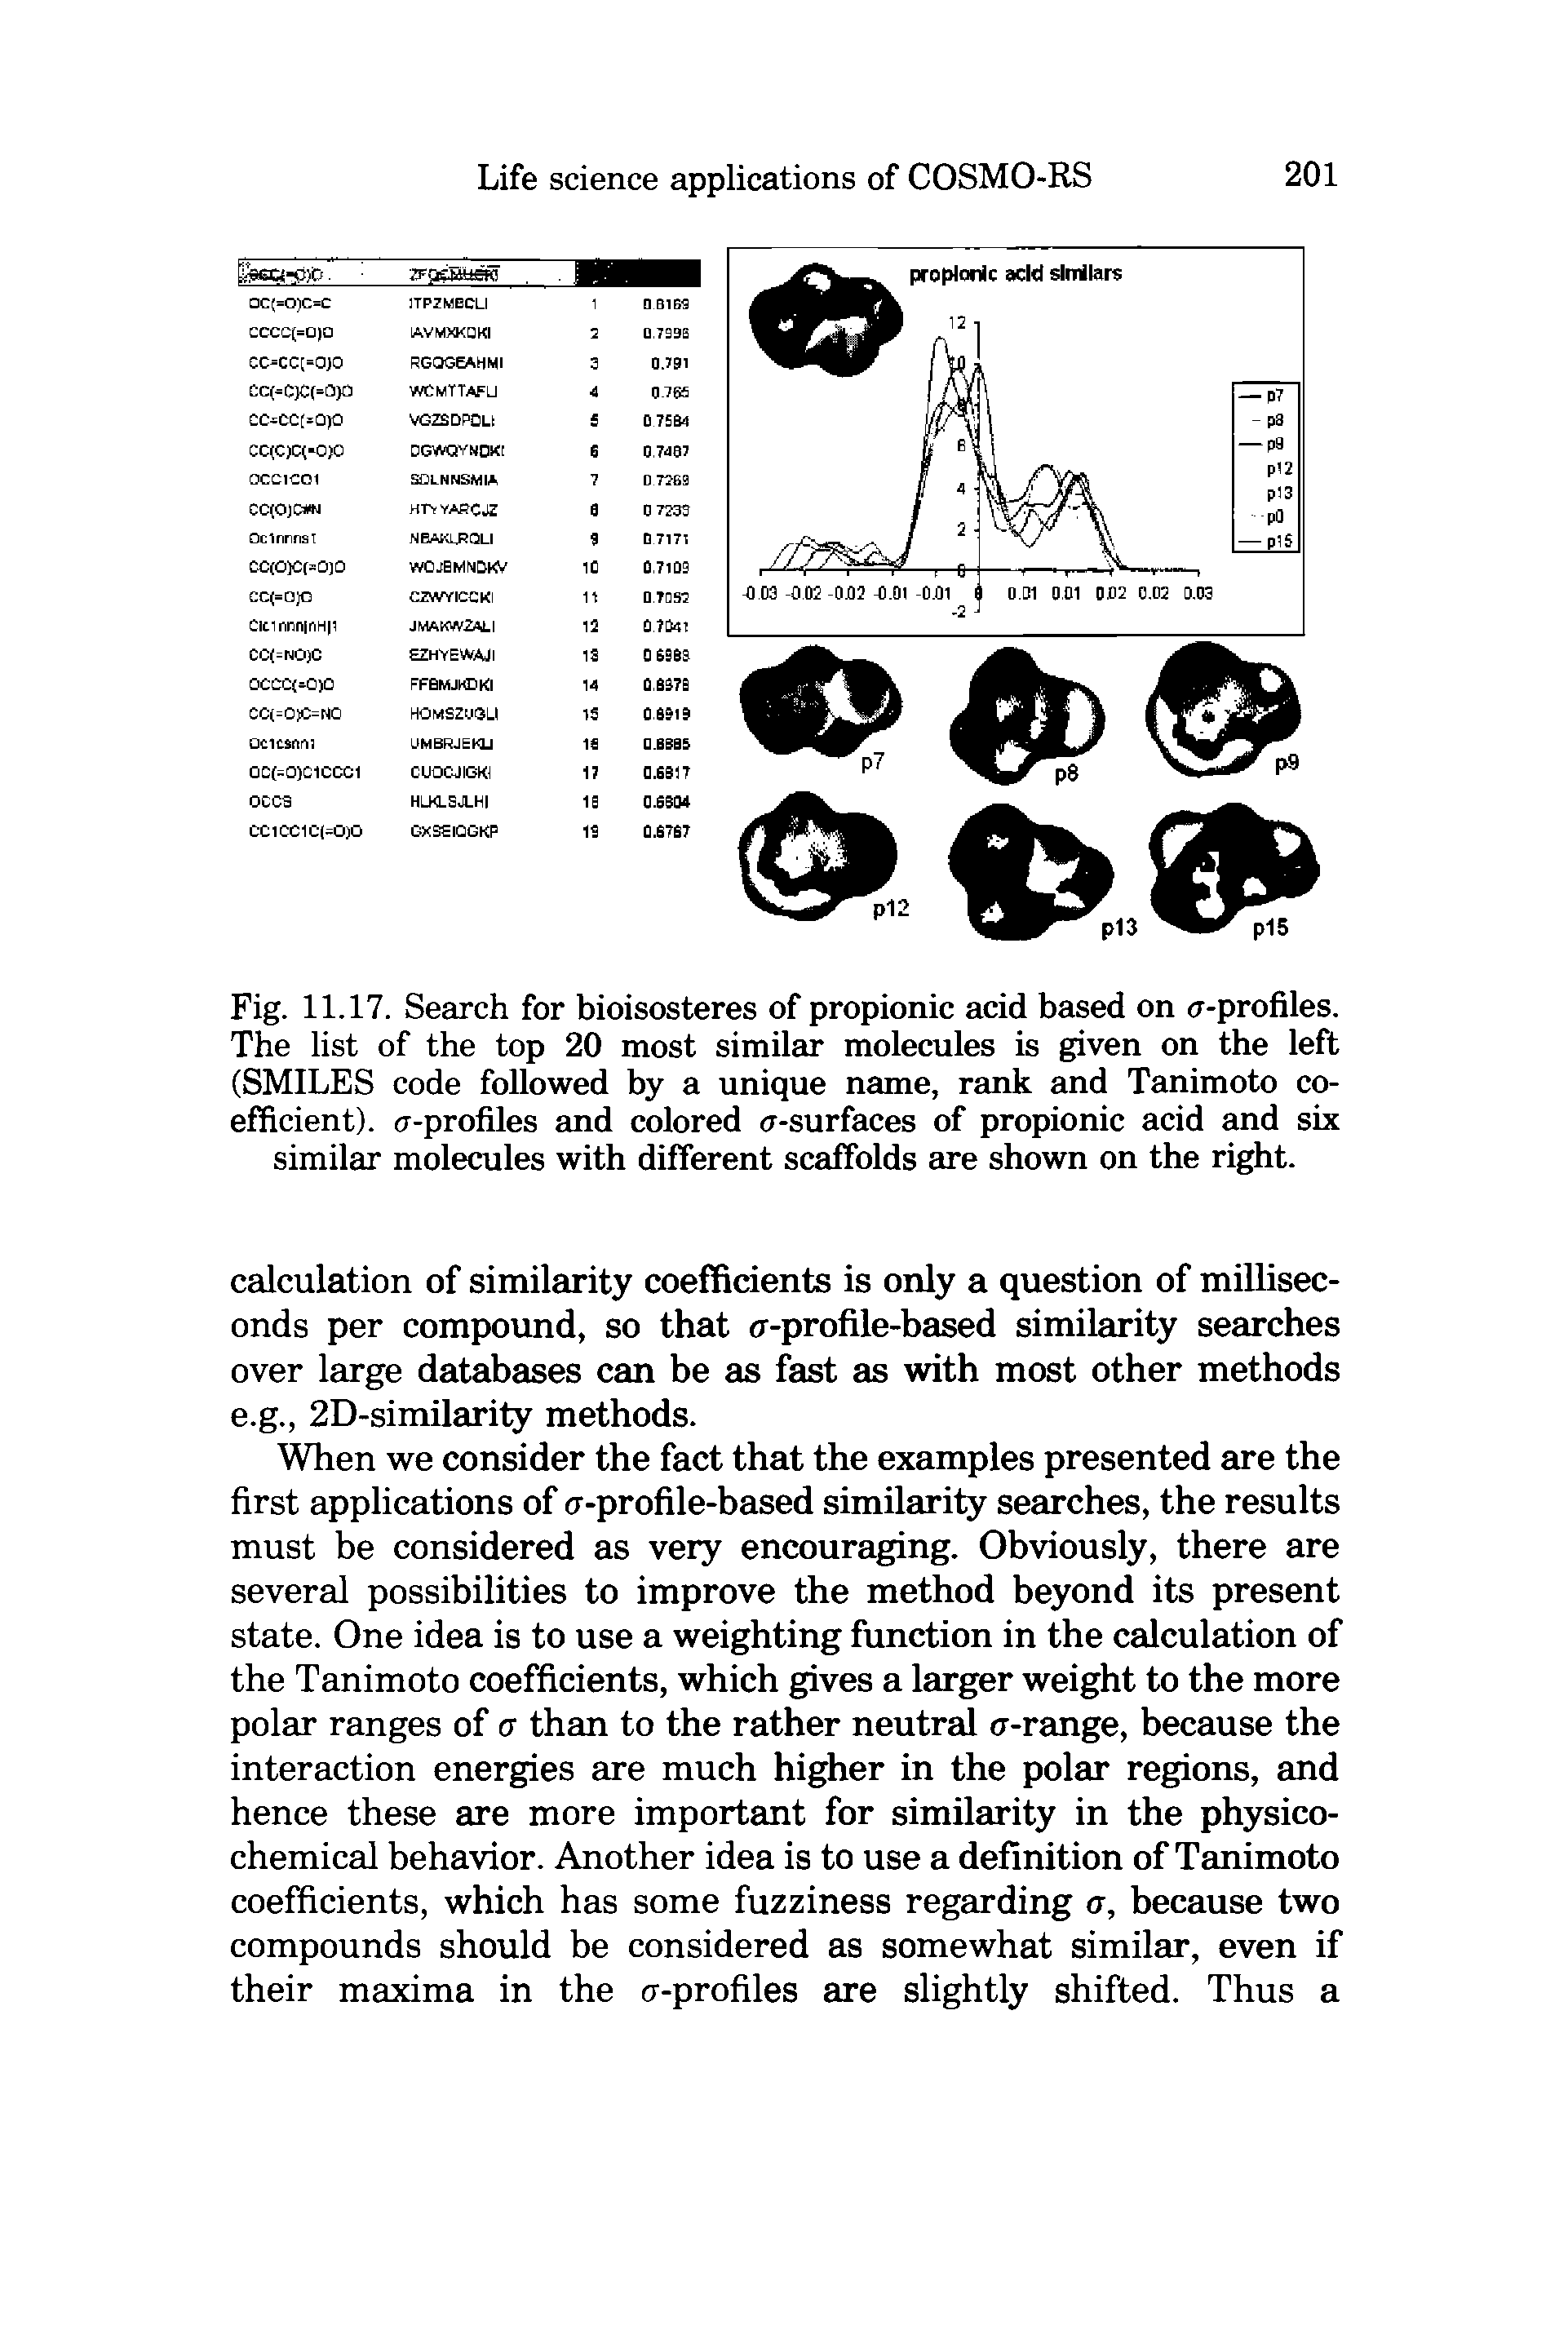 Fig. 11.17. Search for bioisosteres of propionic acid based on <T-profiles. The list of the top 20 most similar molecules is given on the left (SMILES code followed by a unique name, rank and Tanimoto coefficient). -profiles and colored <T-surfaces of propionic acid and six similar molecules with different scaffolds are shown on the right.